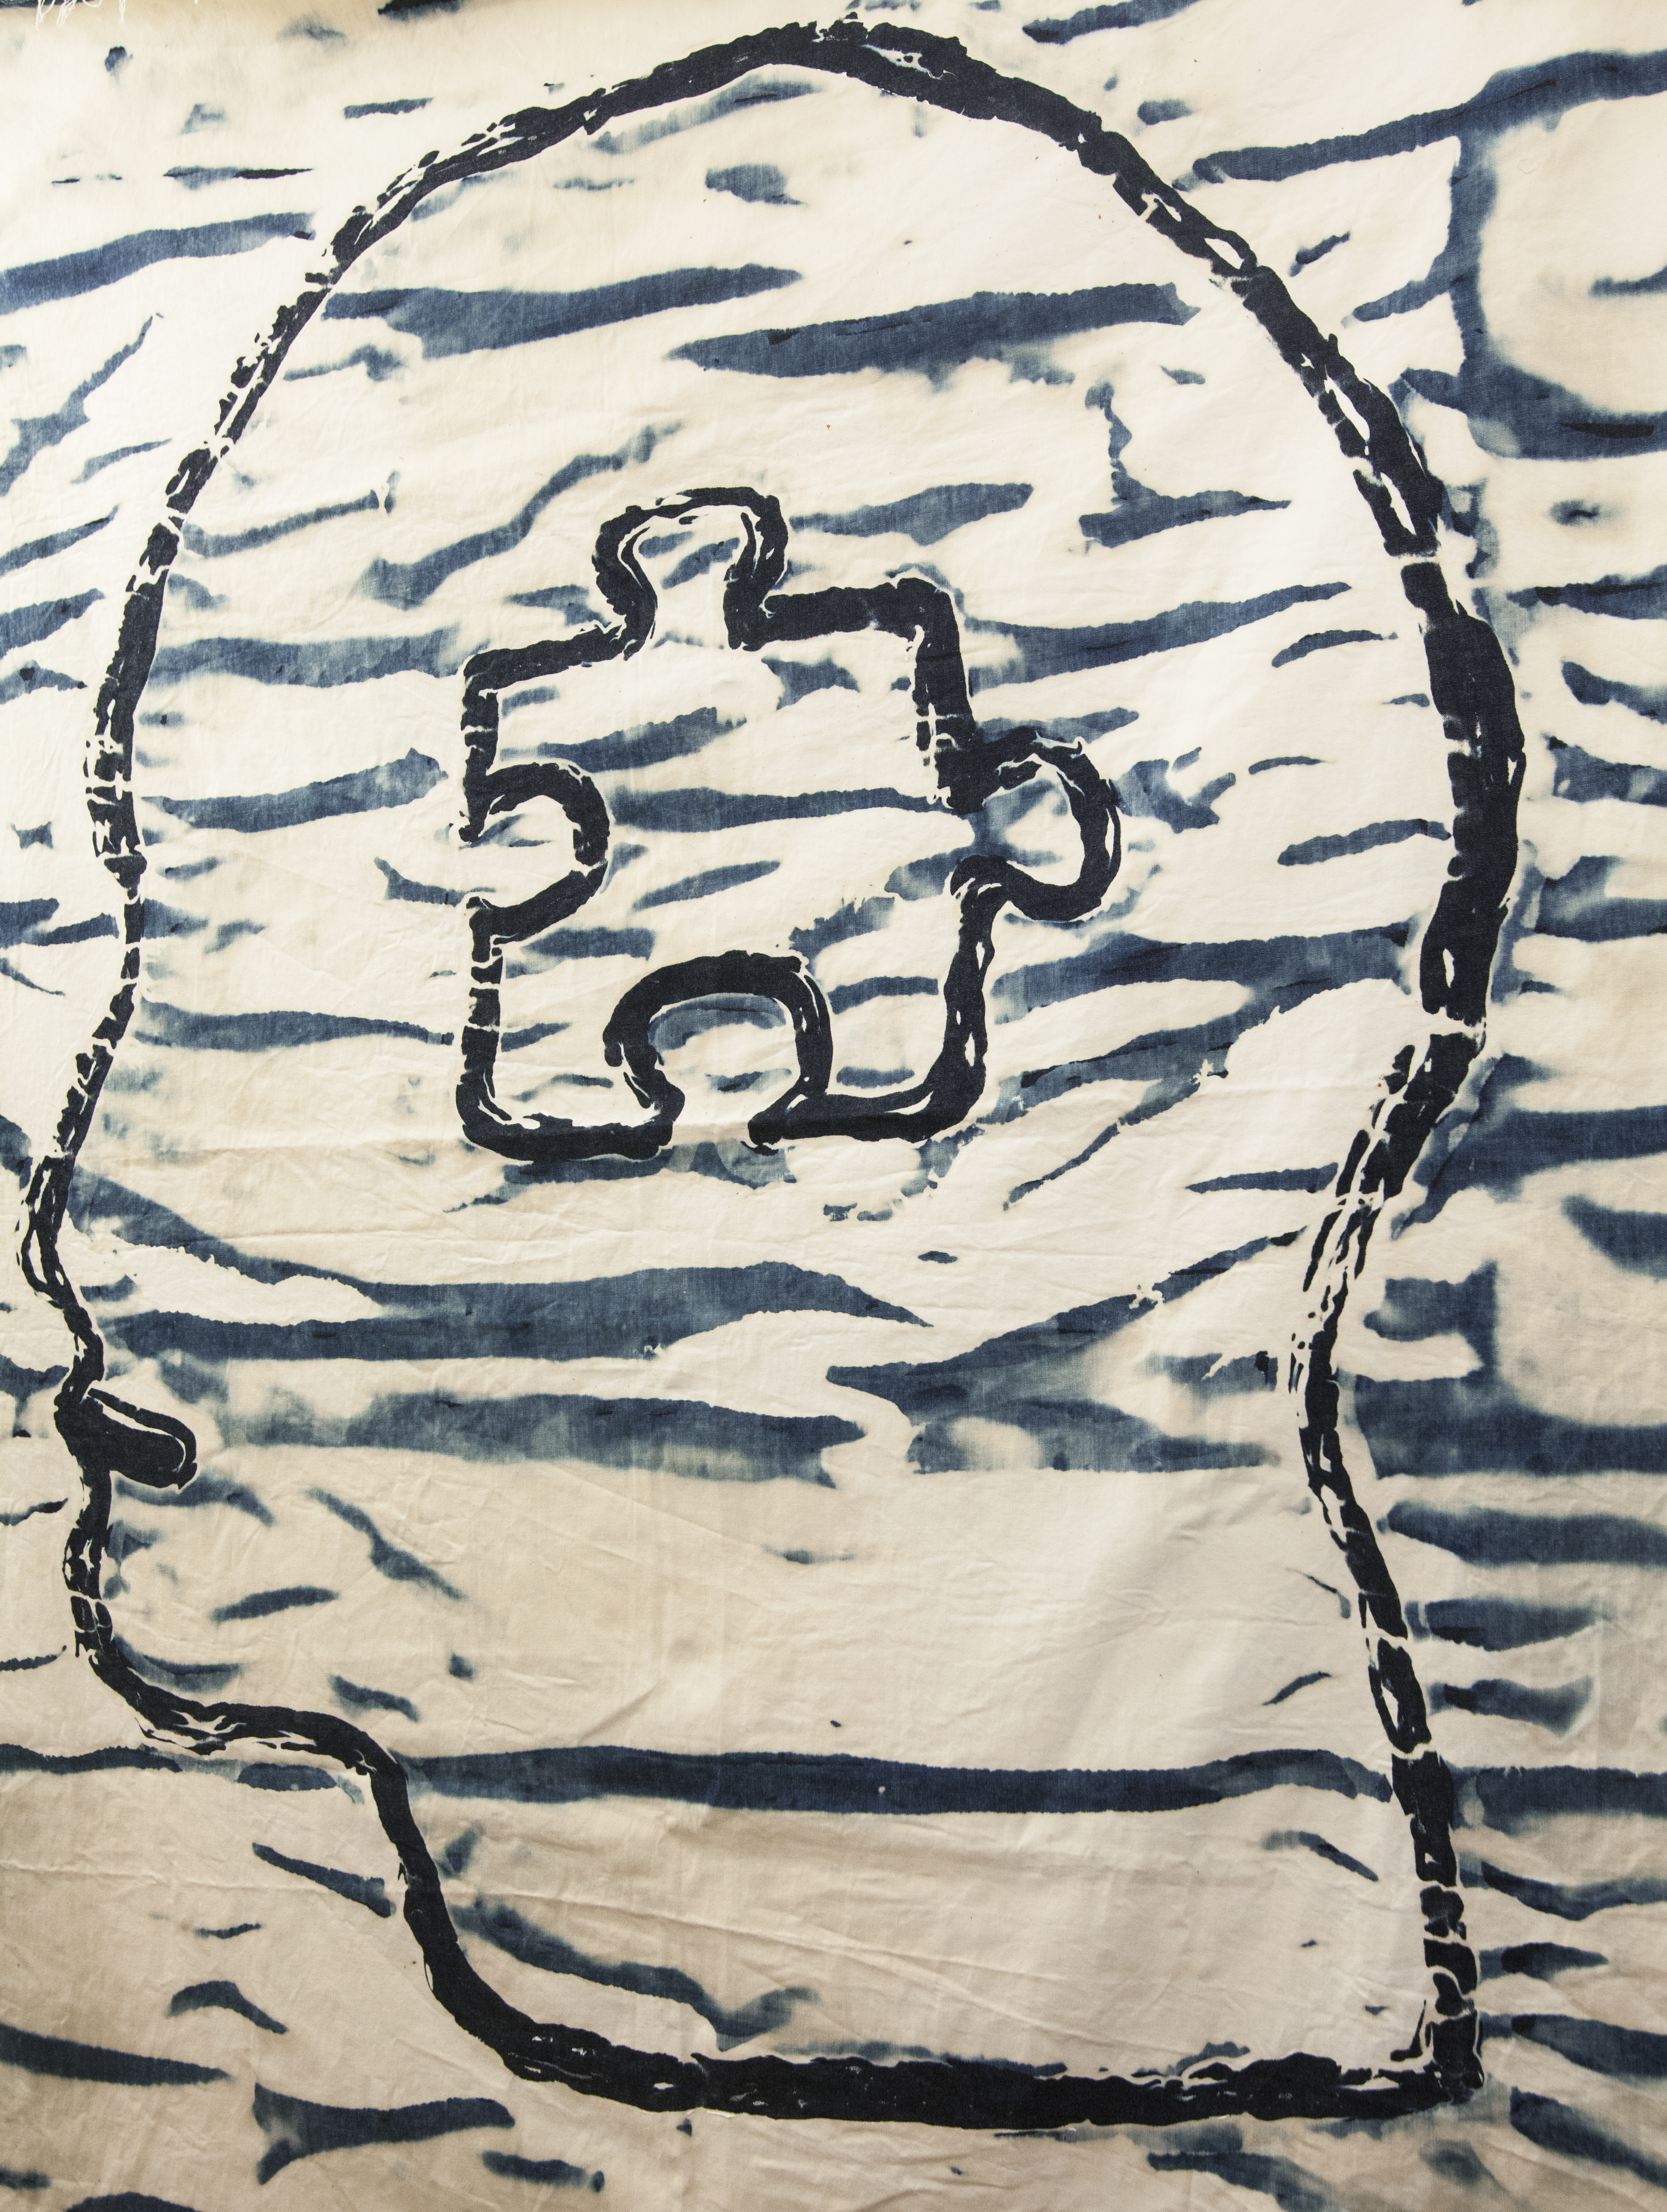 A large patch of bleached denim depicting a face with a puzzle piece in it